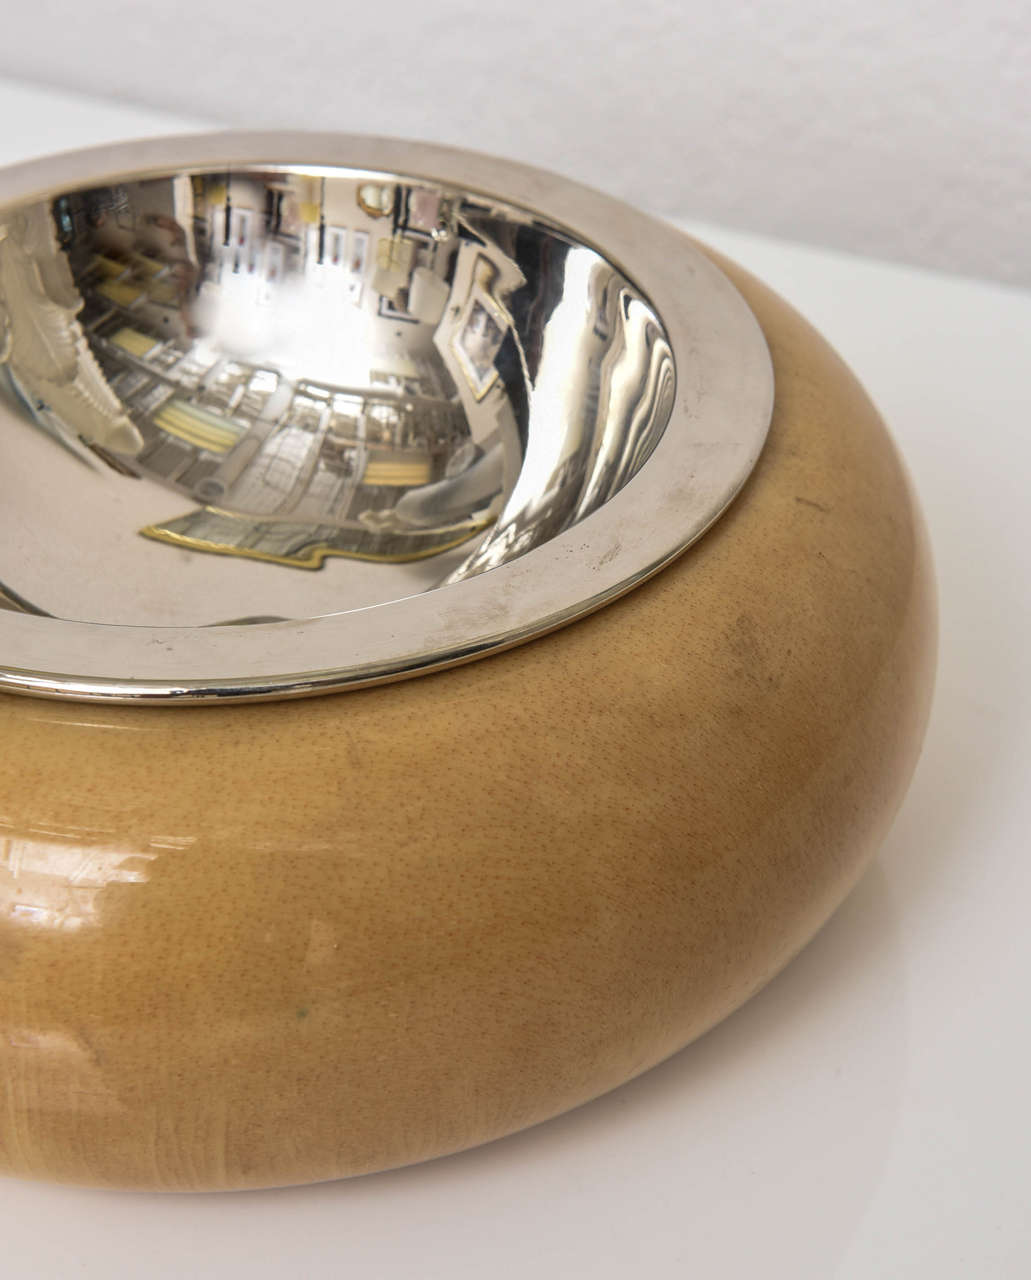 Lacquered Aldo Tura Bowl in Goatskin and Polished Nickel